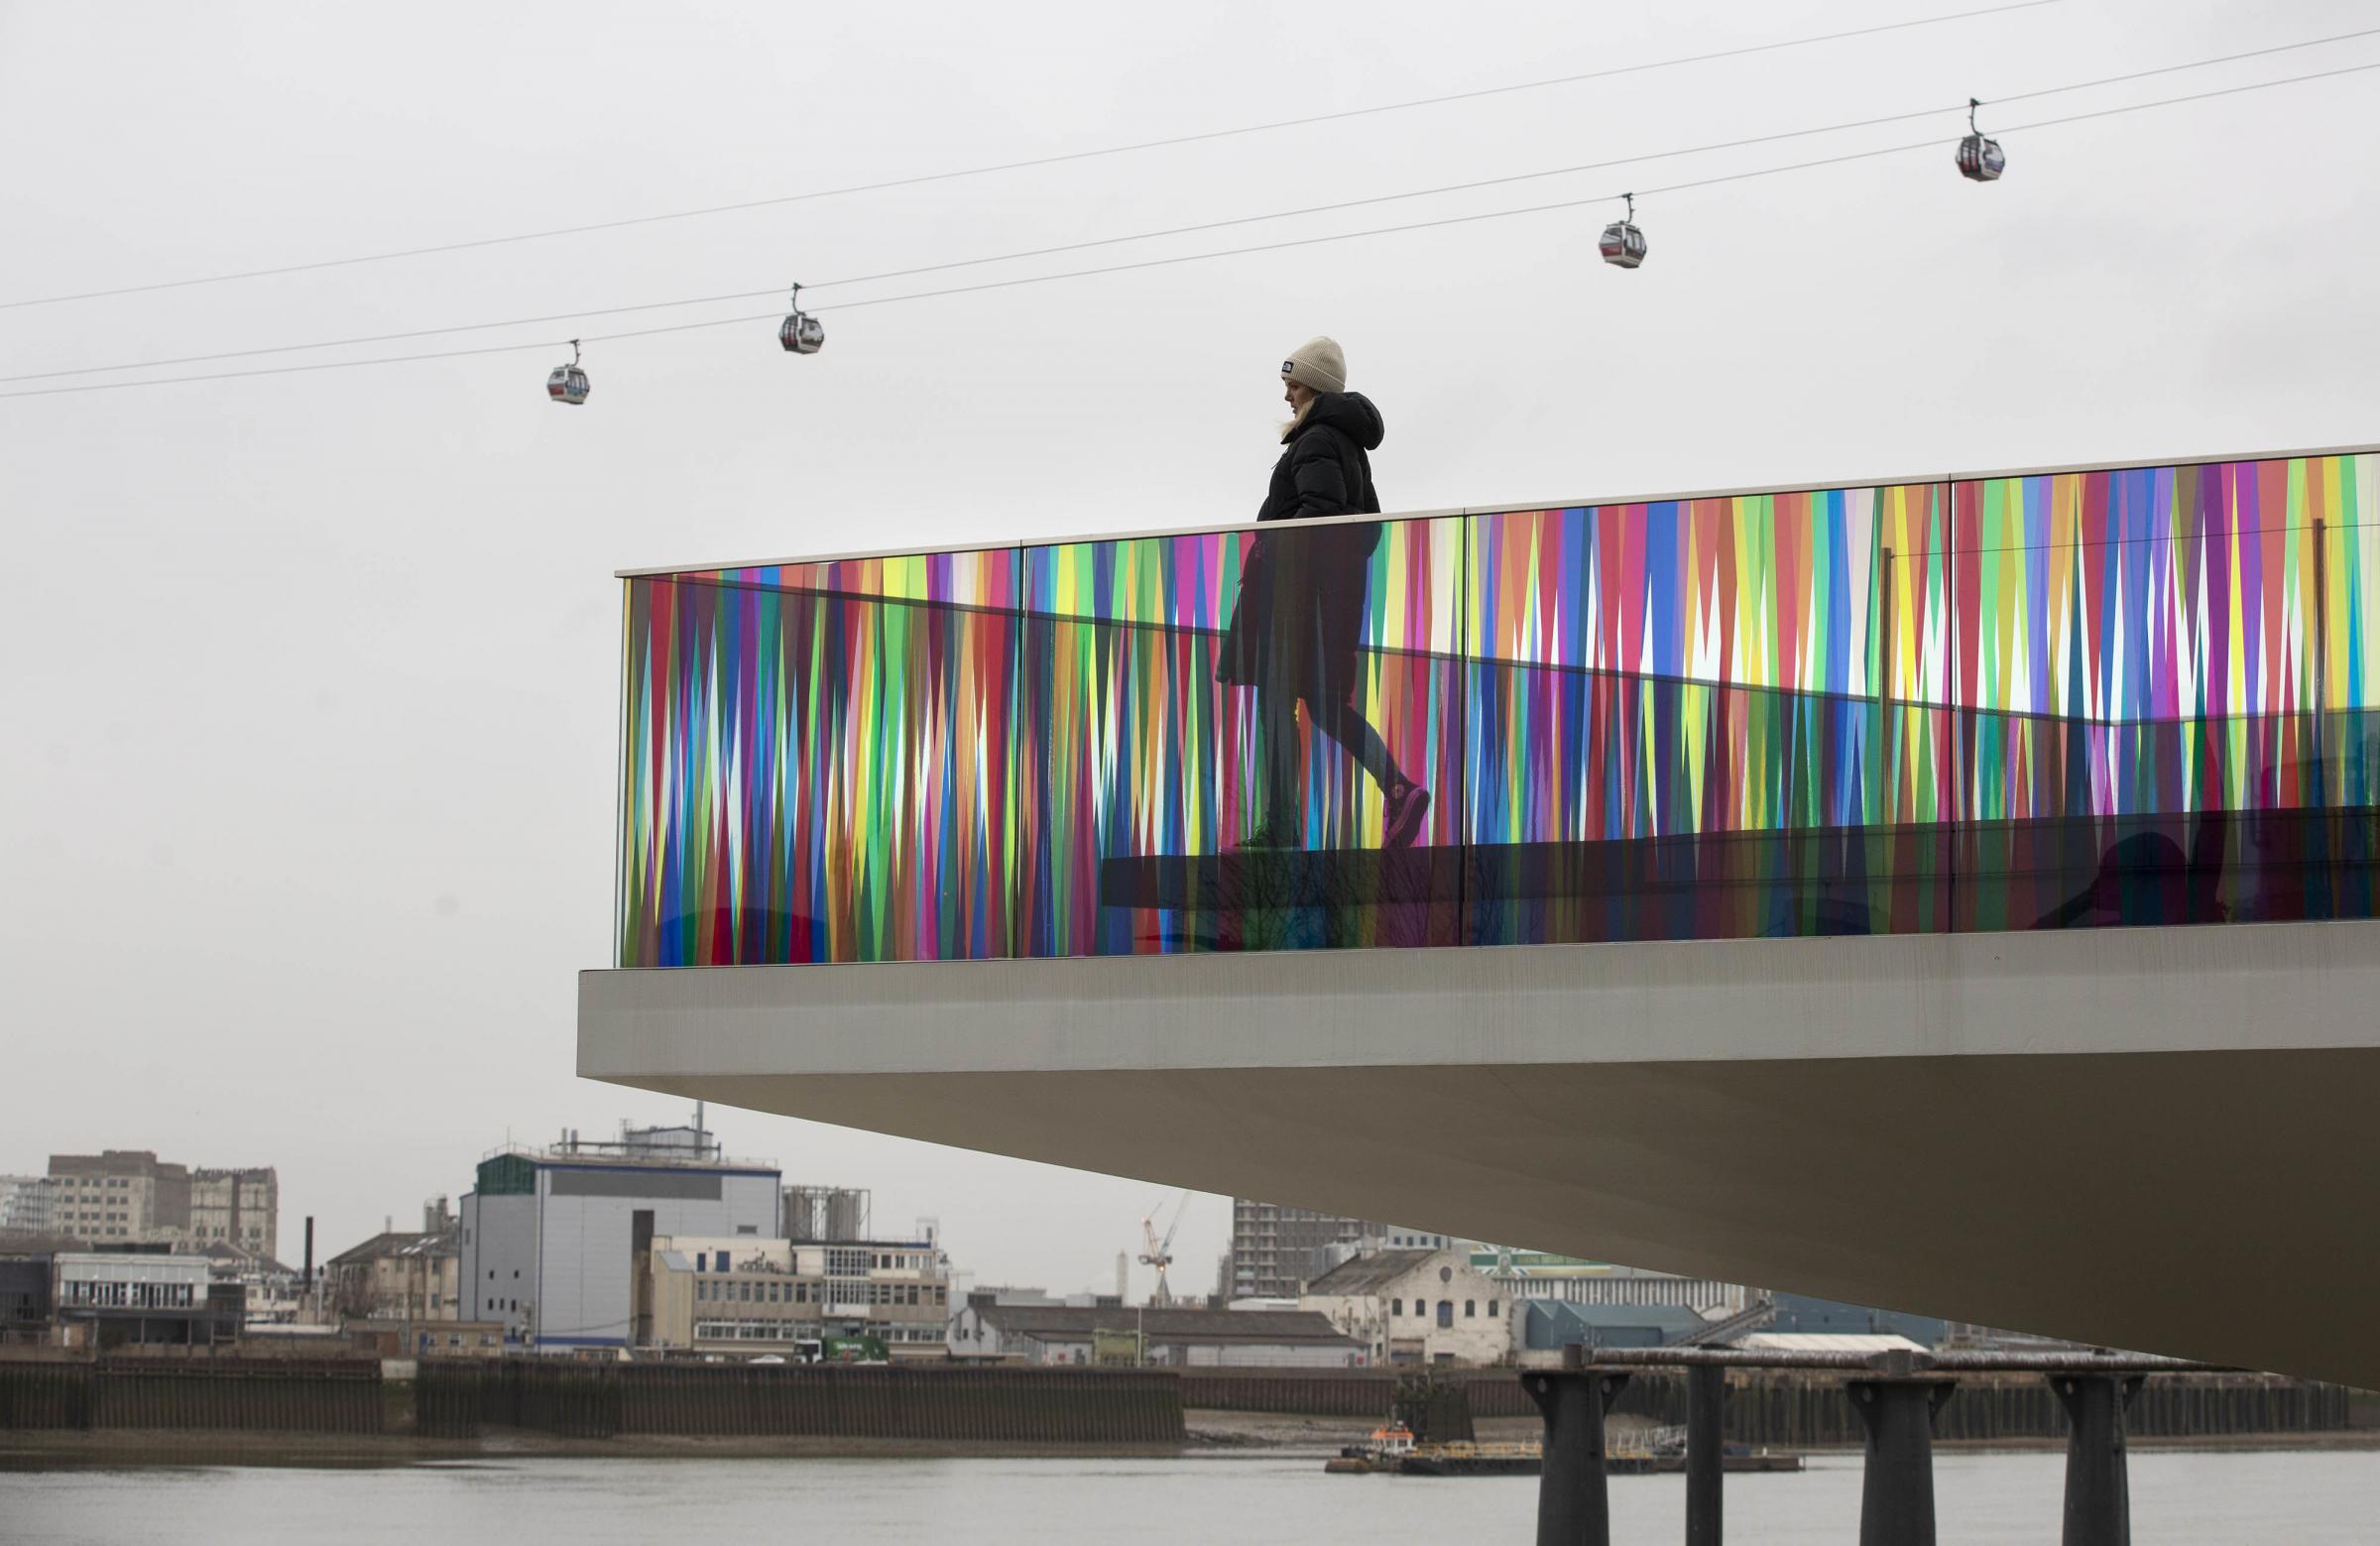 An art installation entitled Hundreds and Thousands, by artist Liz West which has been commissioned by Greenwich Peninsula is unveiled by the riverside in Greenwich, London.